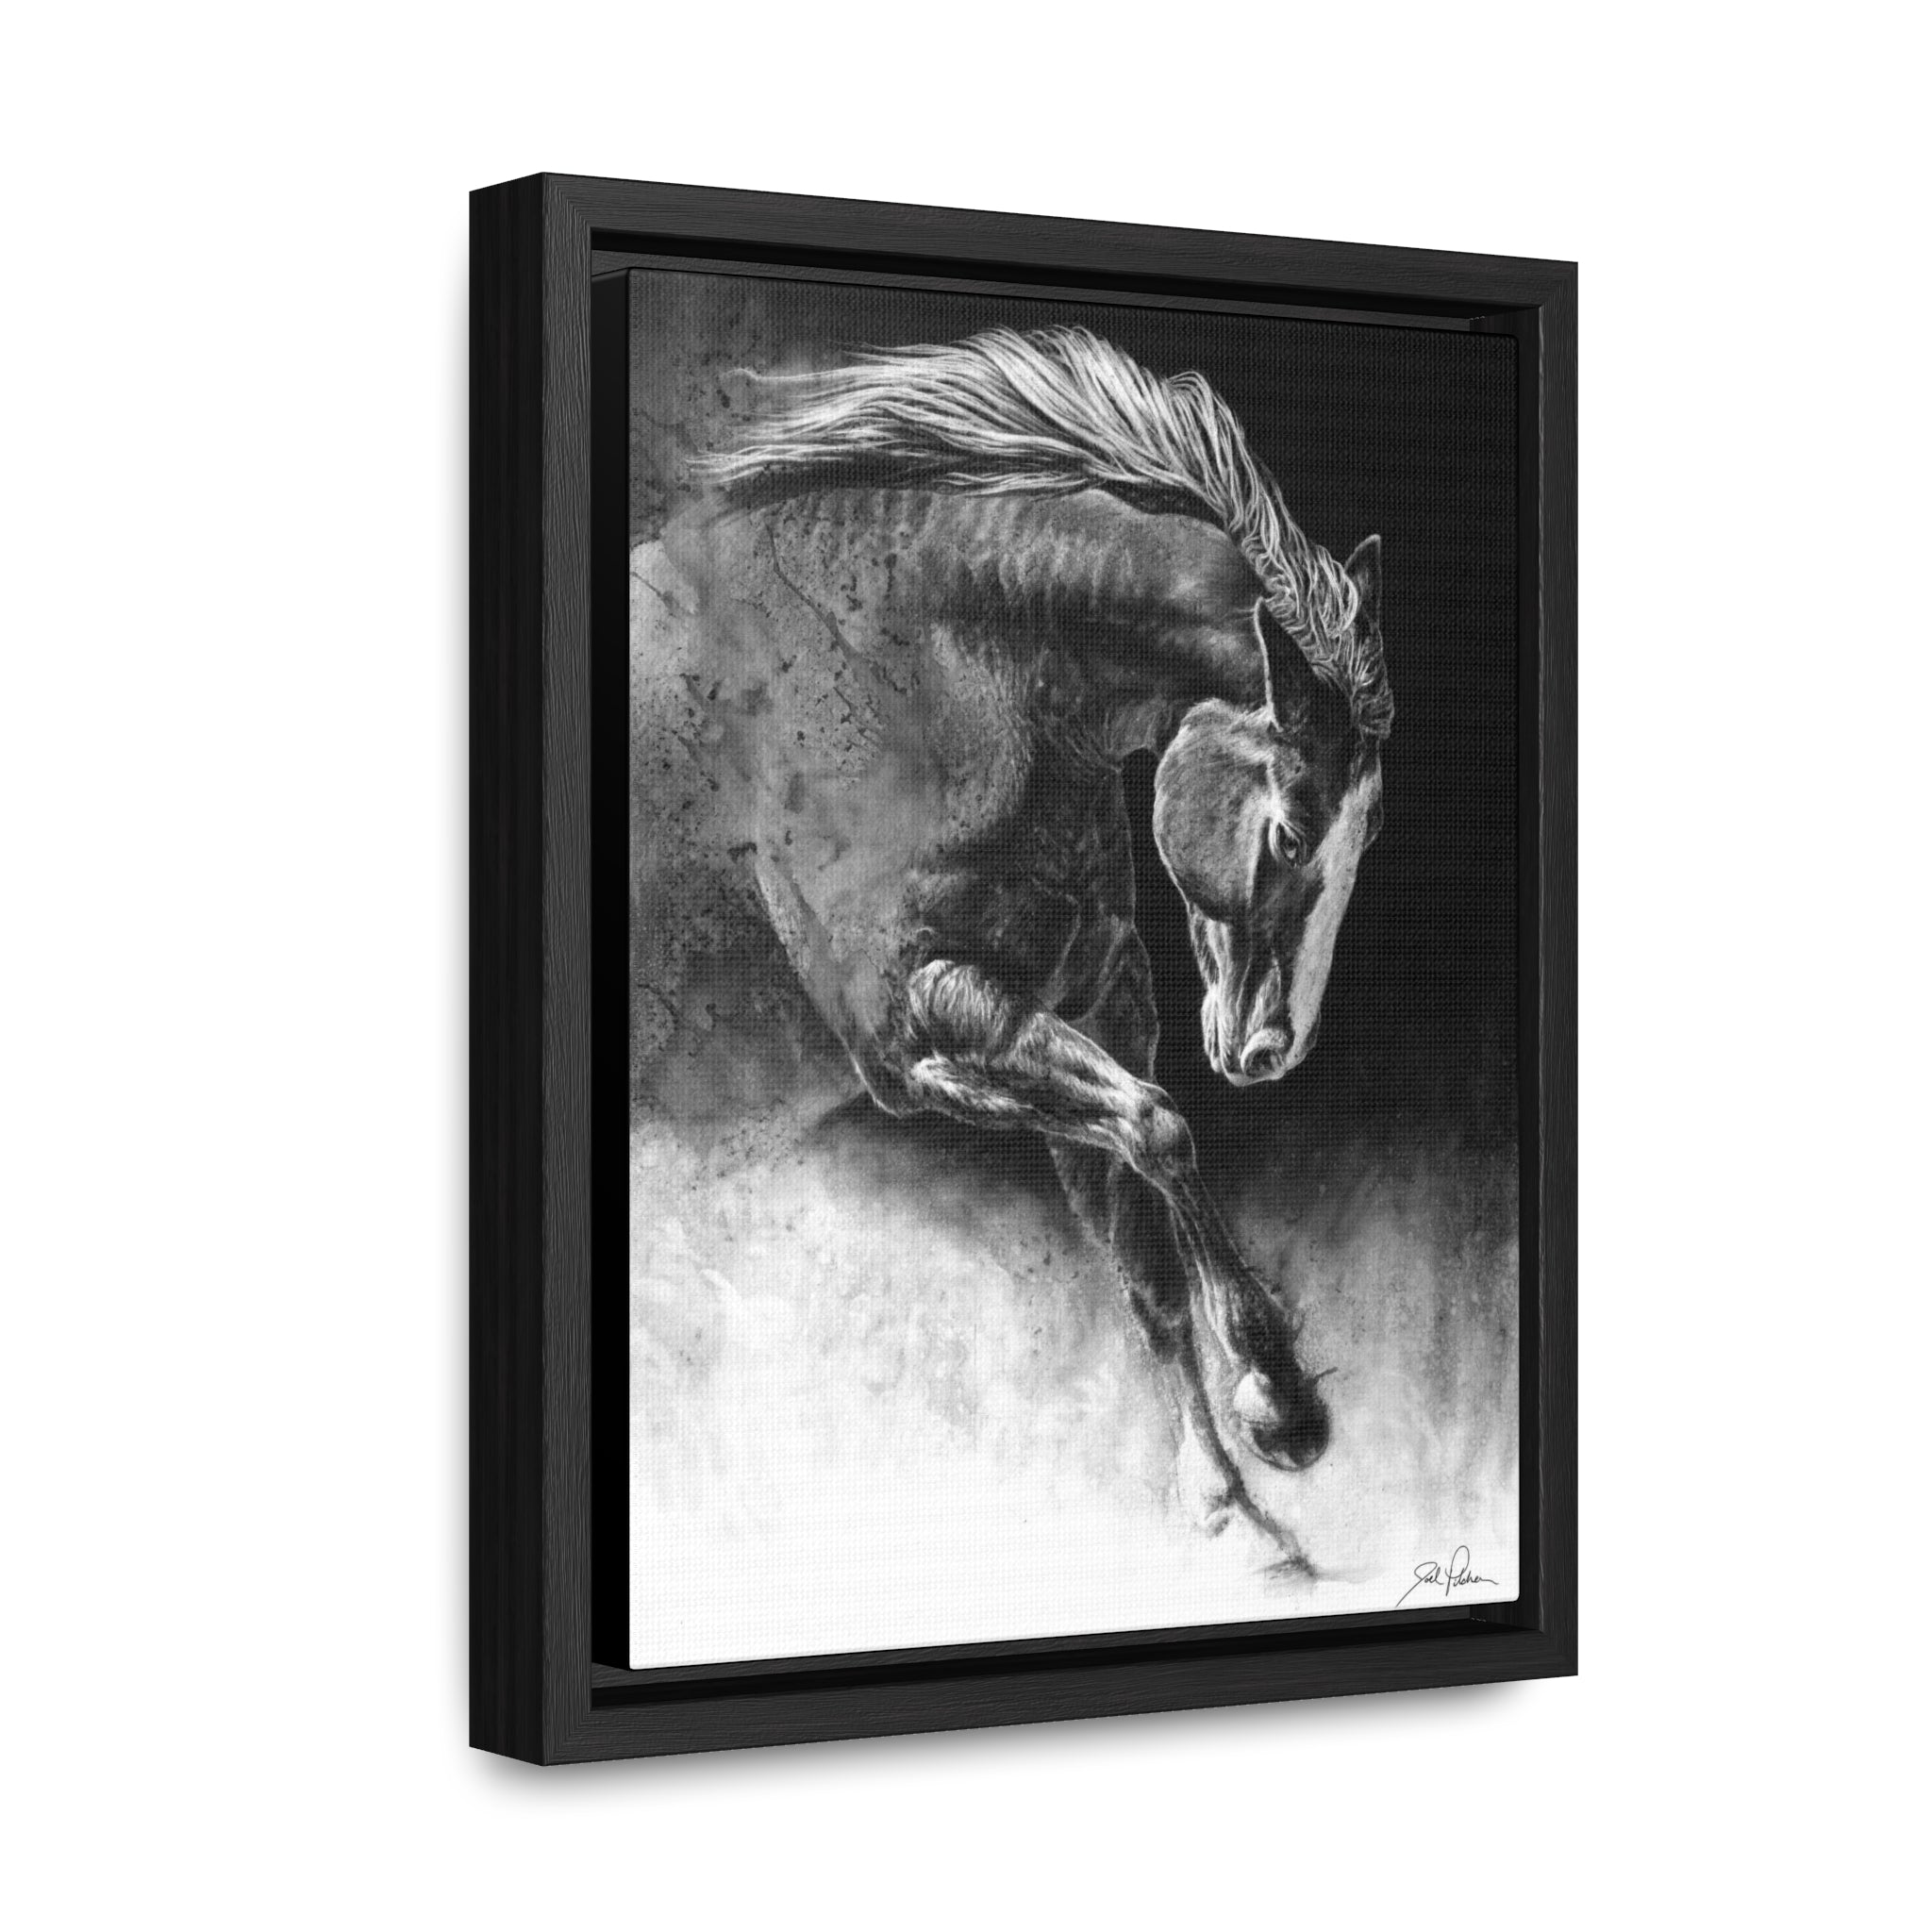 "Unbridled" Gallery Wrapped/Framed Canvas